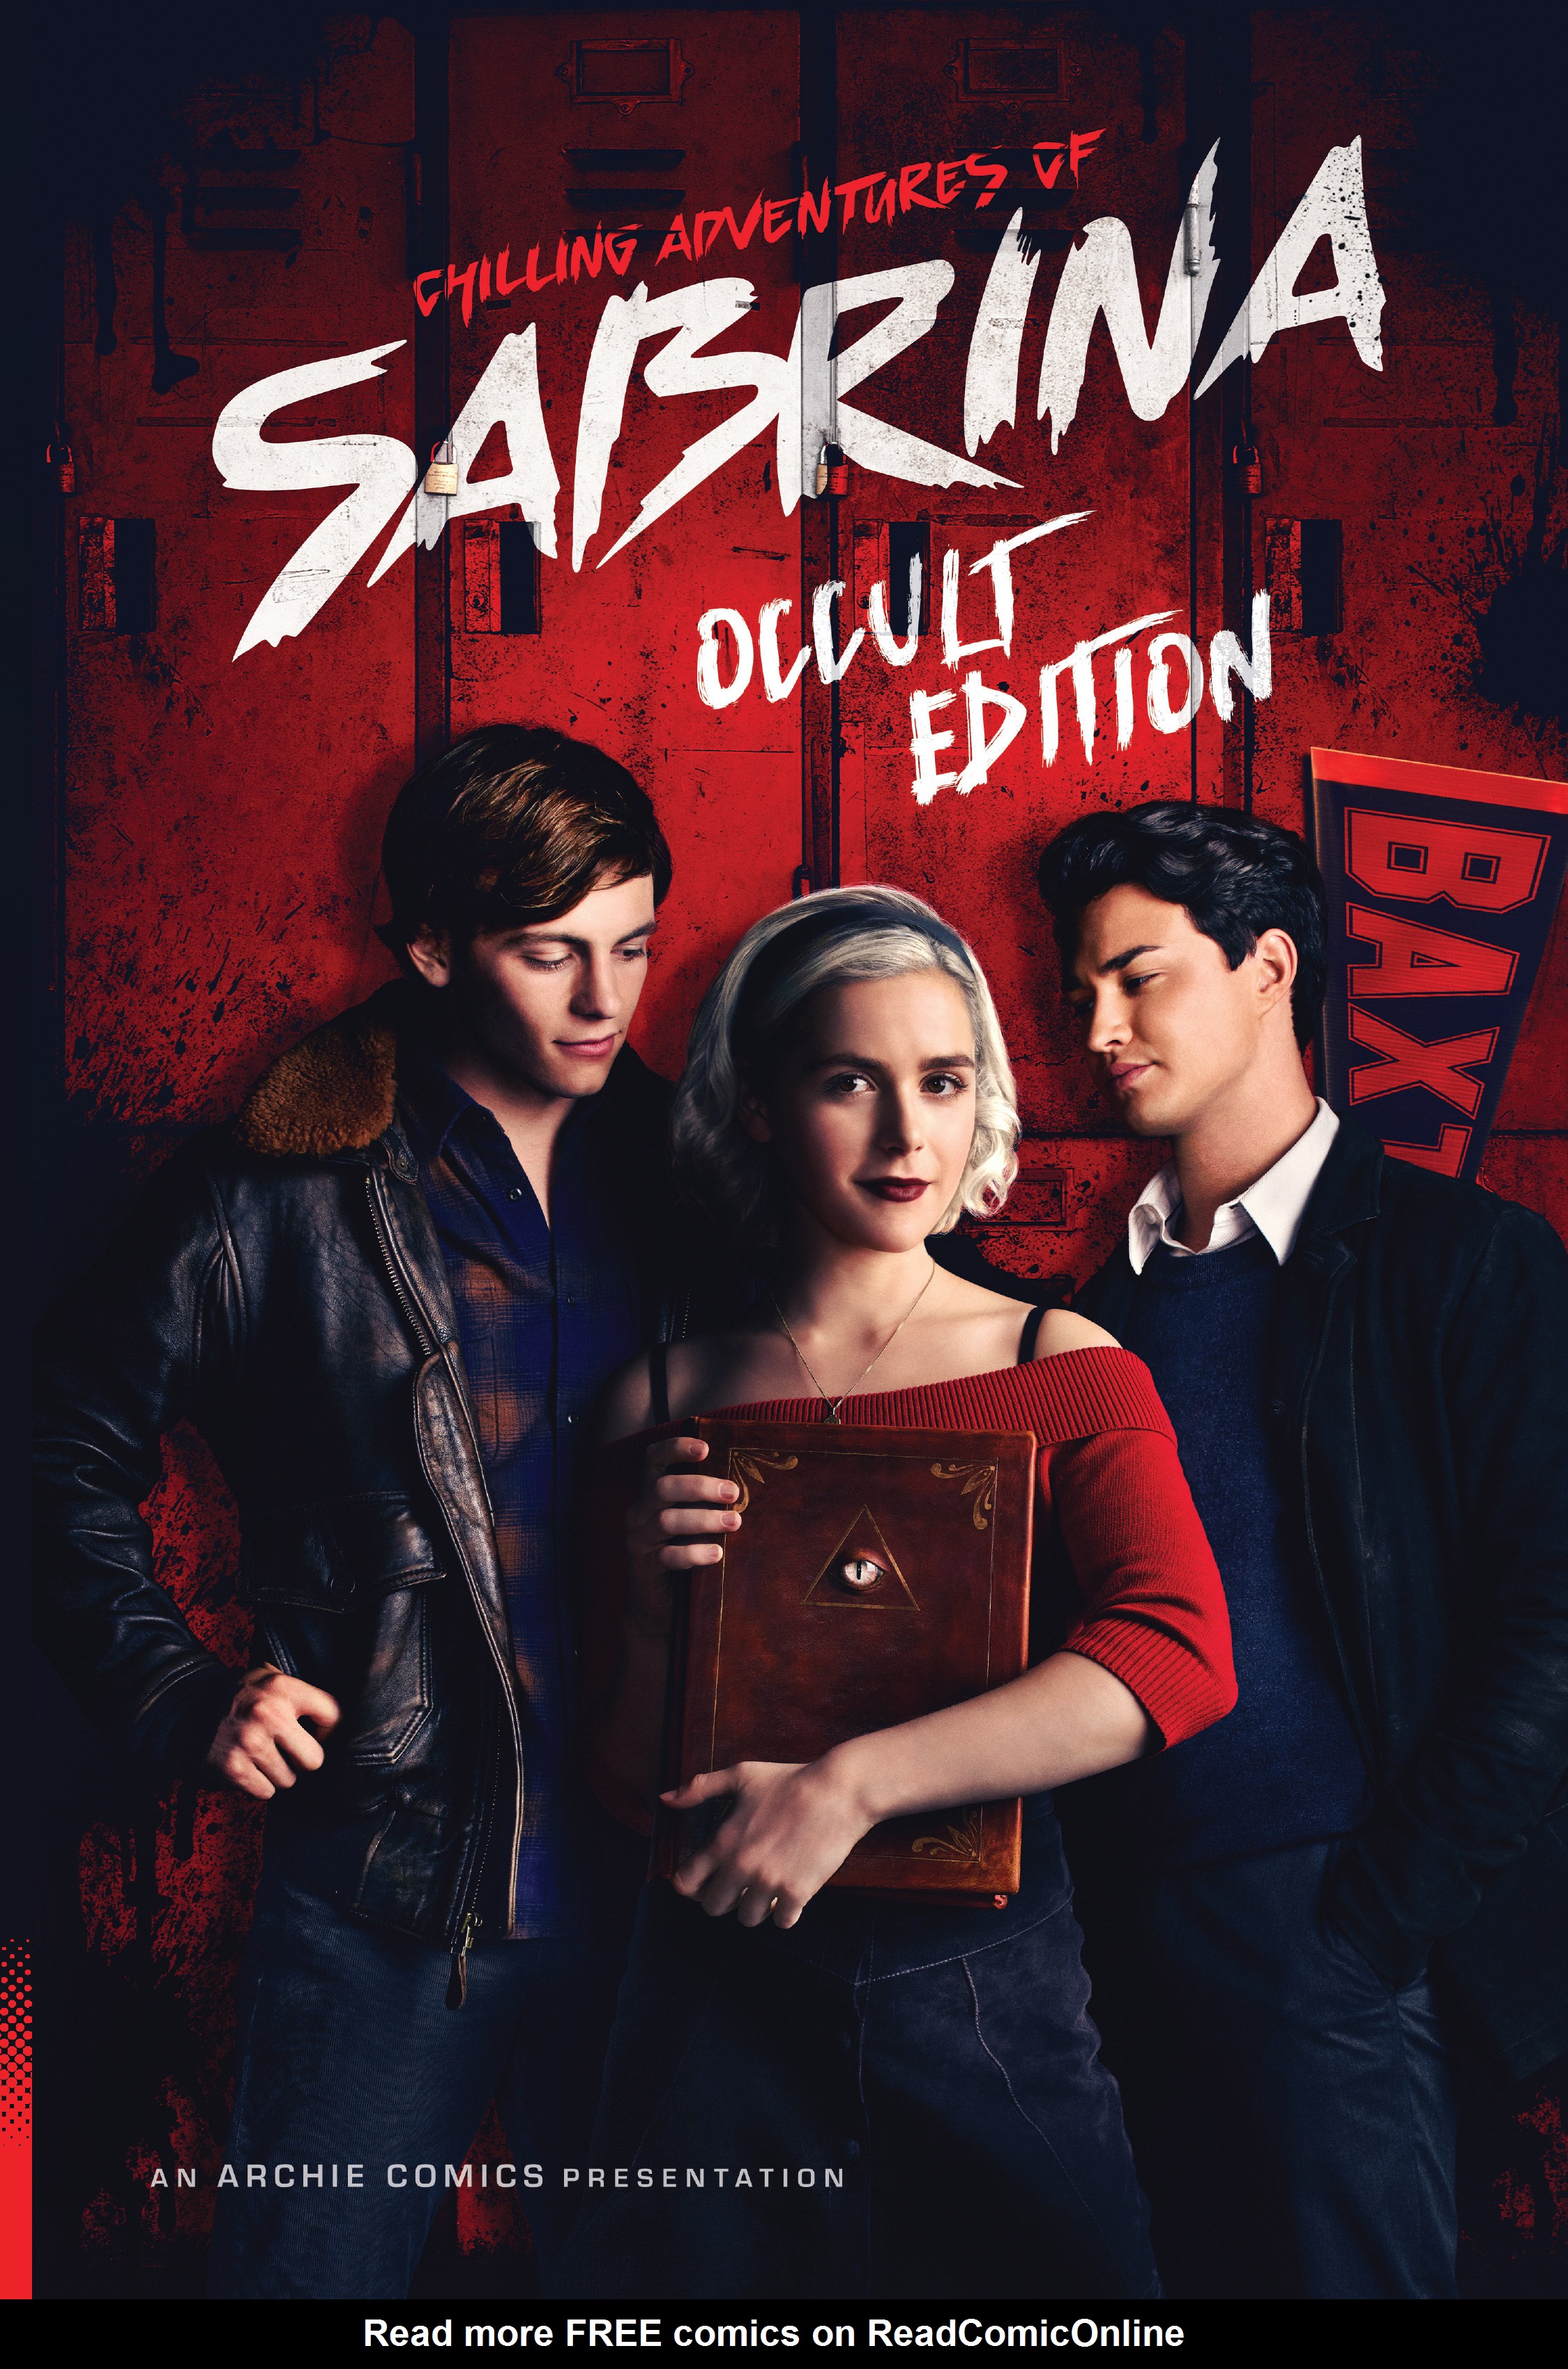 Read online Chilling Adventures of Sabrina: Occult Edition comic -  Issue # TPB (Part 1) - 1